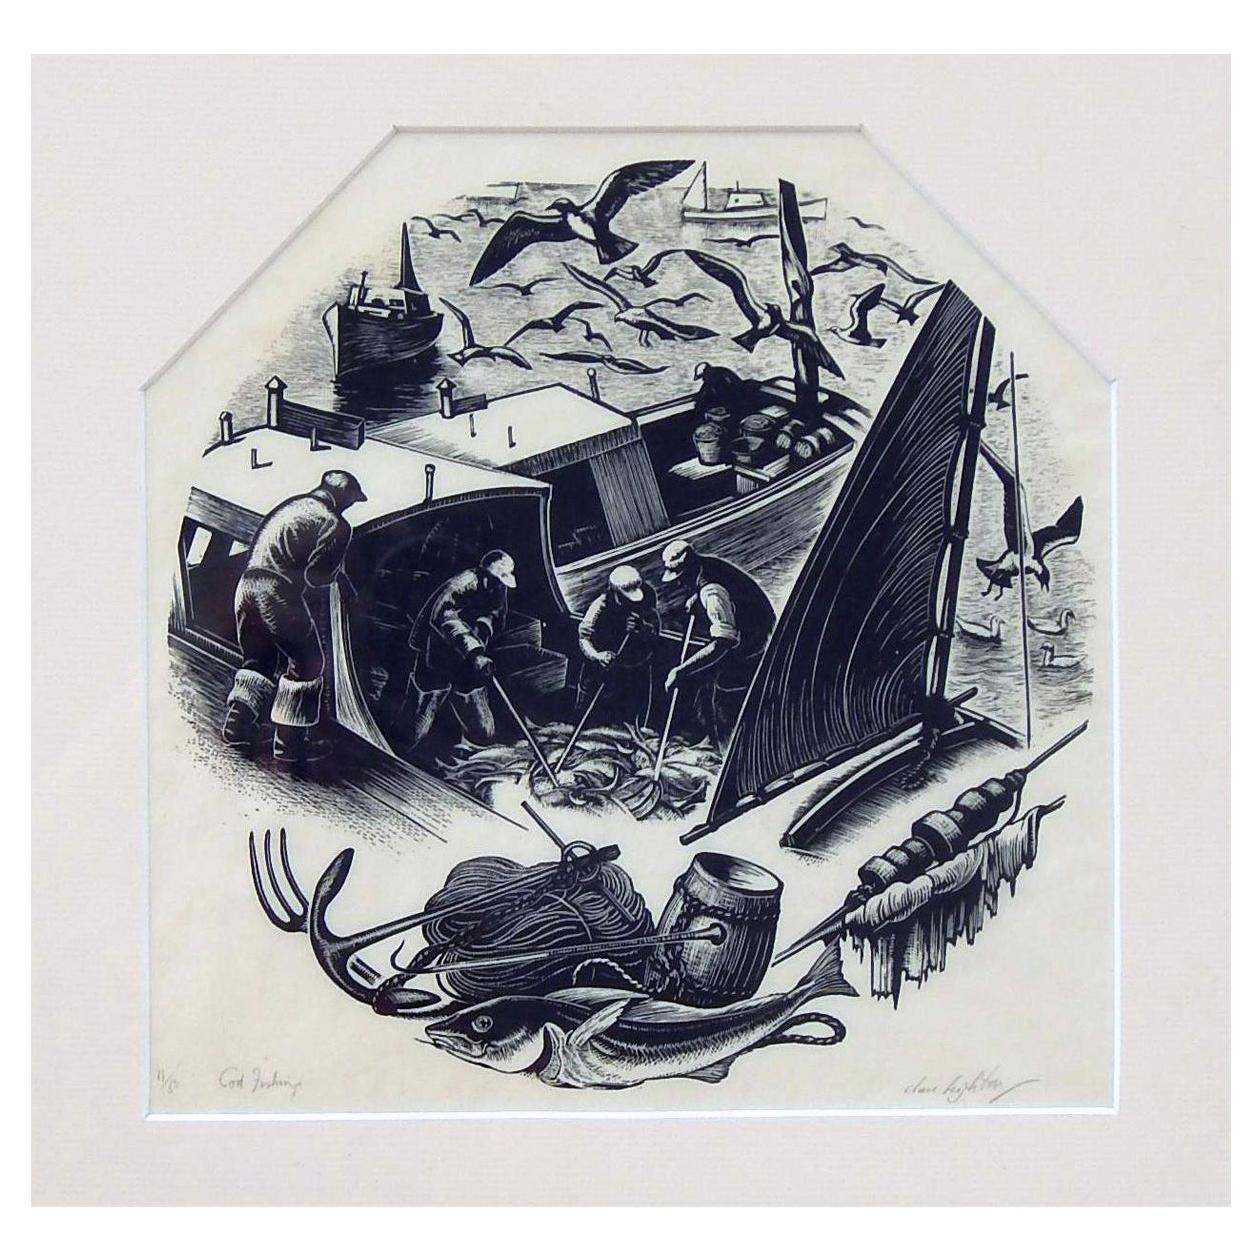 Clare Leighton Connecticut Artist, Wood Engraving for Wedgewood "Cod Fishing"